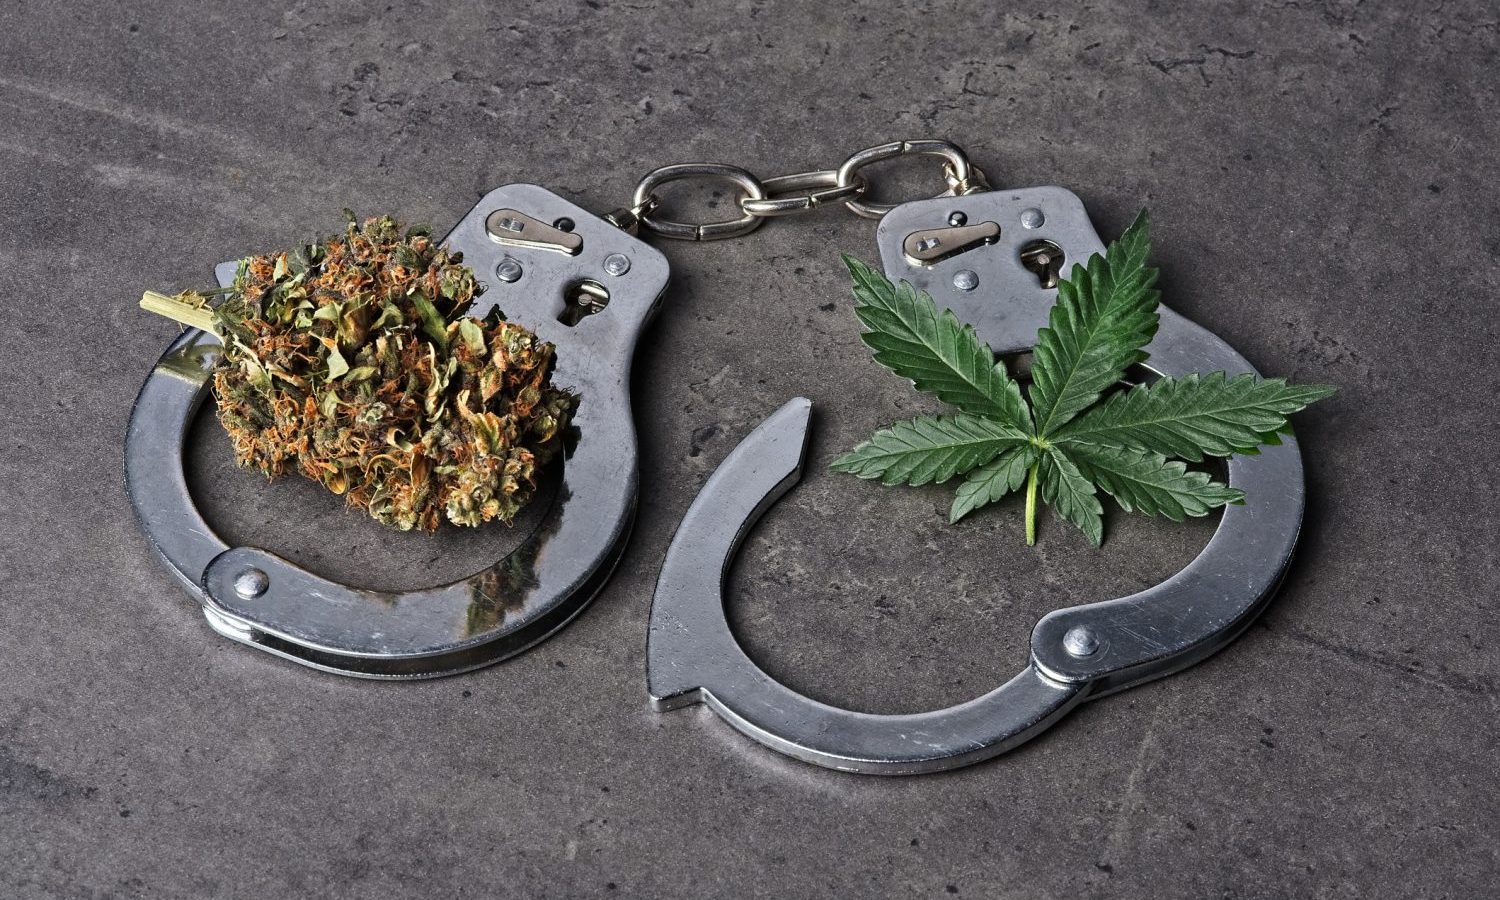 How Marijuana Legalization Will Greatly Benefit The Criminal Justice System